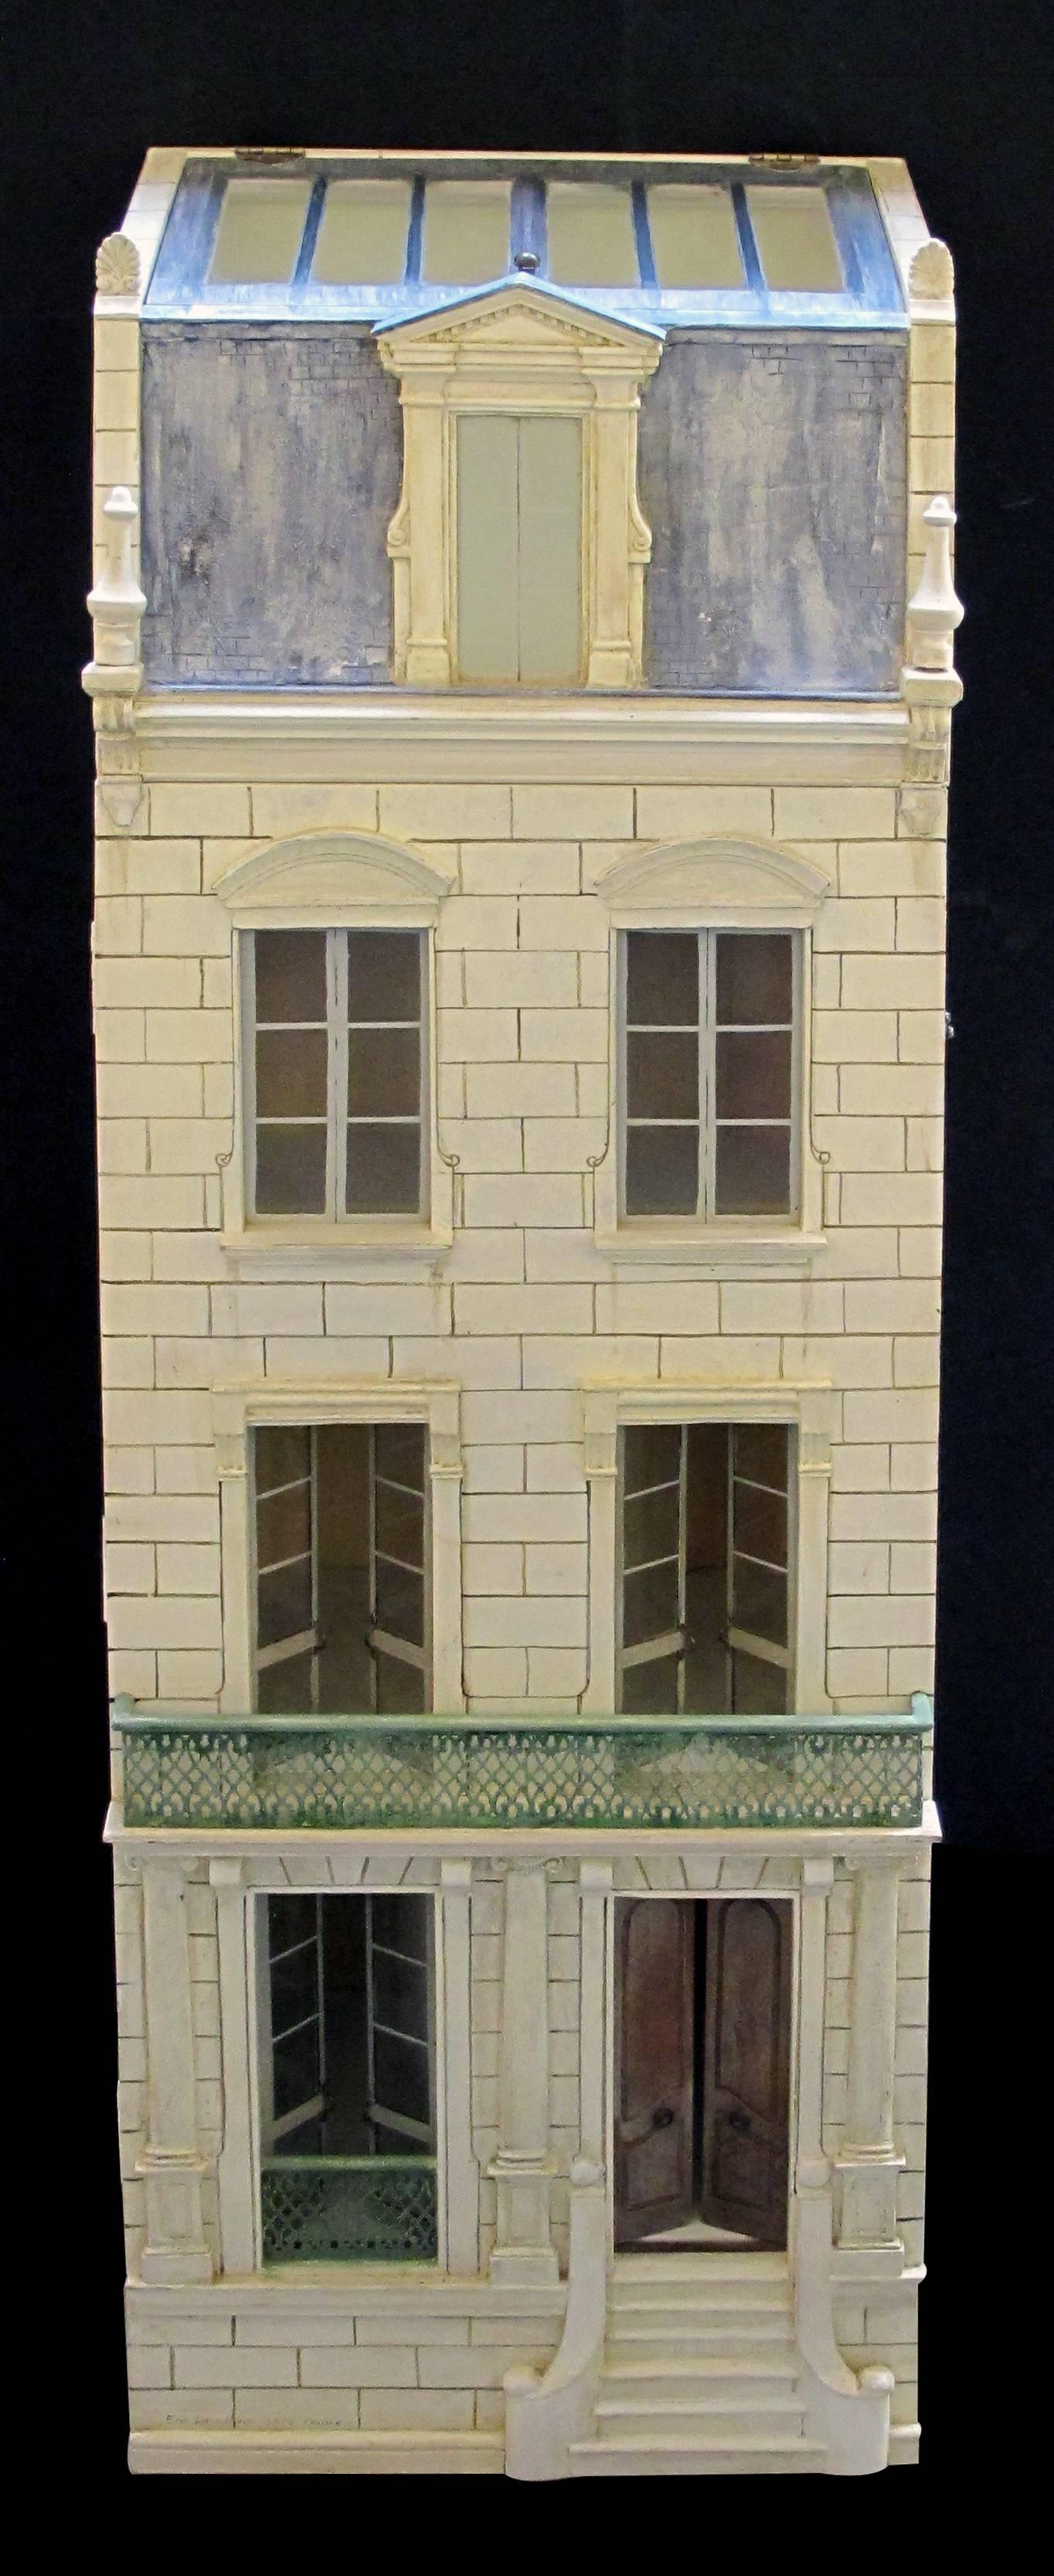 Contemporary Masterfully Crafted Wooden Painted Dollhouse/Cabinet by Eric & Carole Lansdown